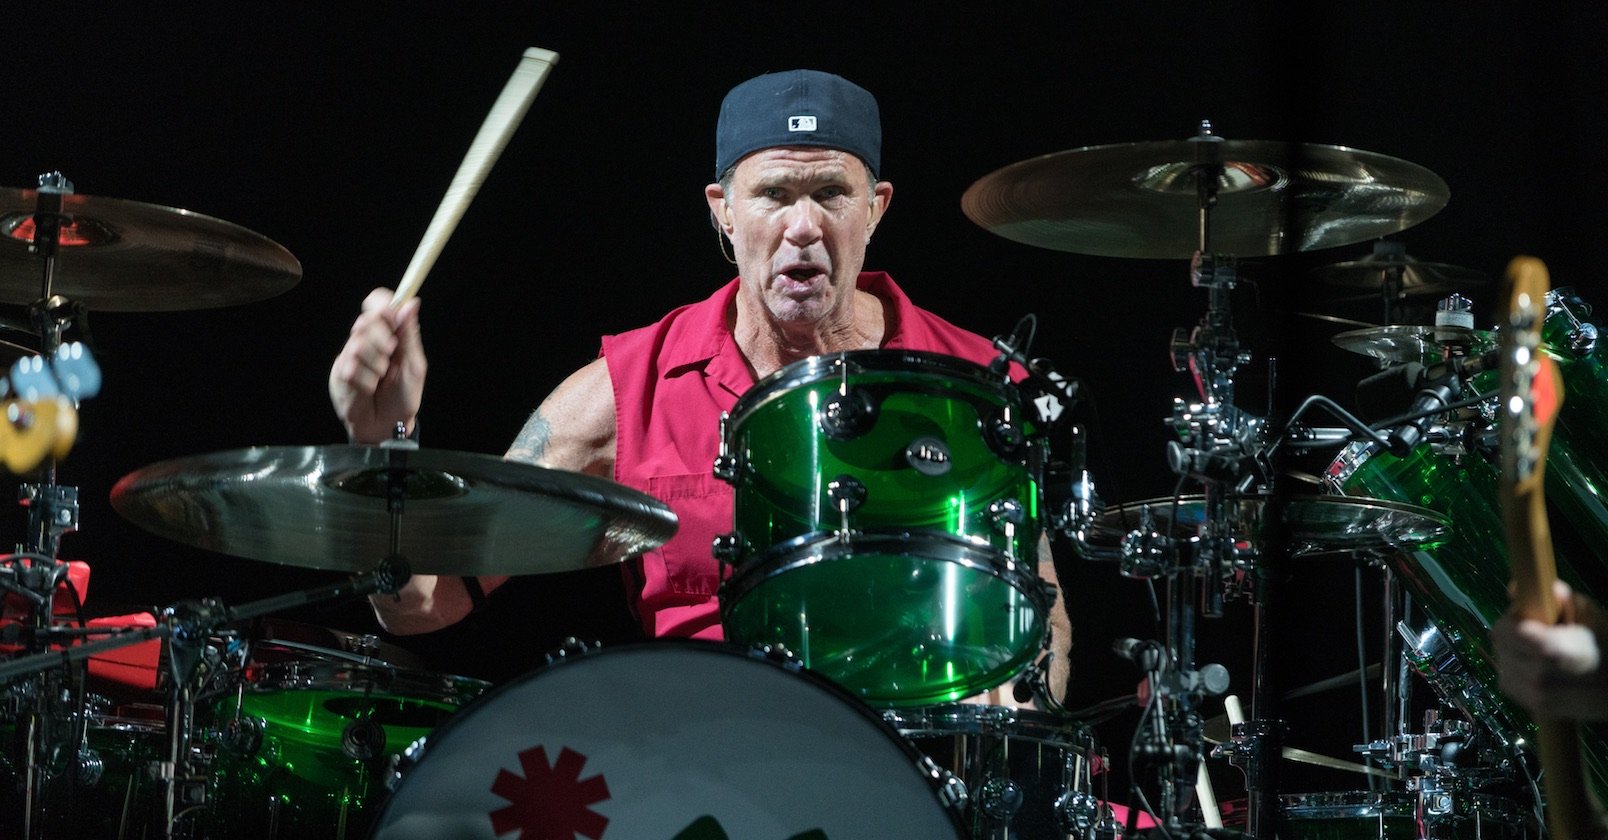 Red Hot Chili Peppers – Viel Live-Spaß mit den Chili Peppers in der Hauptstadt. – Part of Drum History: Chad Smith.